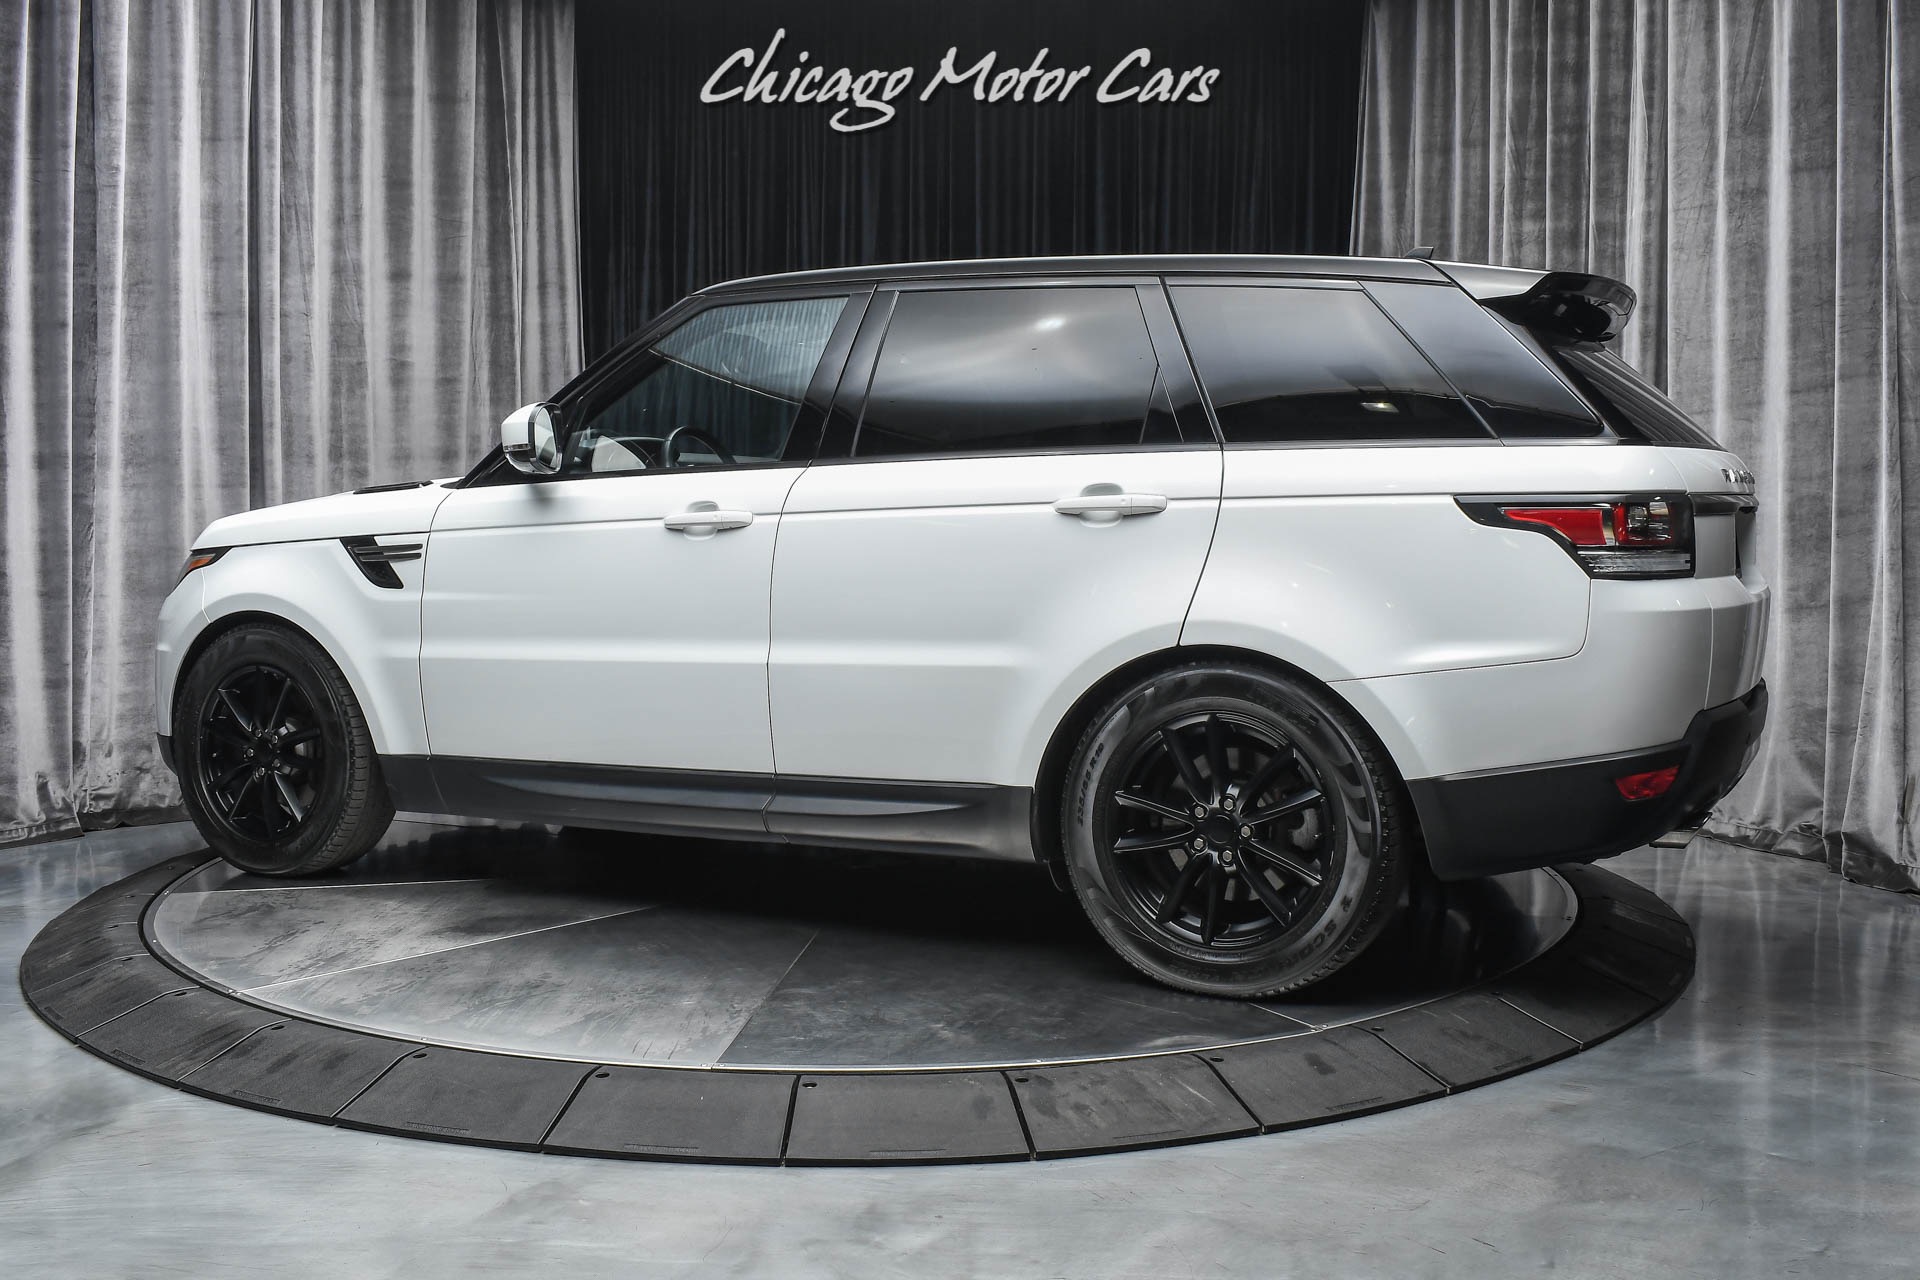 Used-2015-Land-Rover-Range-Rover-Sport-SE-69kMSRP-Panoramic-Roof-Climate-Comfort-and-Visibility-Pack